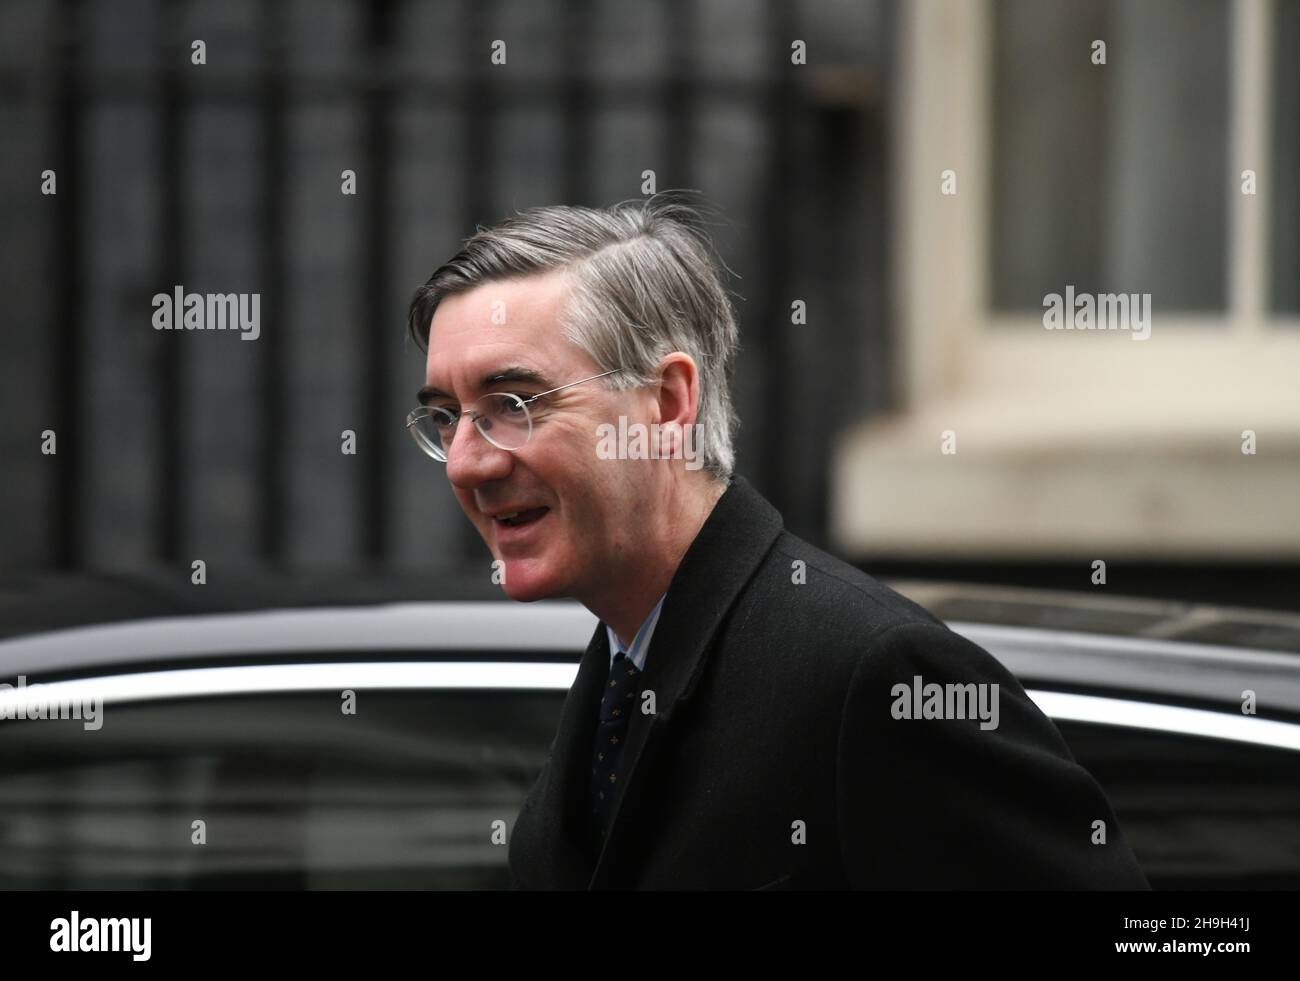 Downing Street, London, UK. 7 December 2021. Jacob Rees-Mogg MP, Lord President of the Council, Leader of the Commons in Downing Street for weekly cabinet meeting. Credit: Malcolm Park/Alamy Live News. Stock Photo